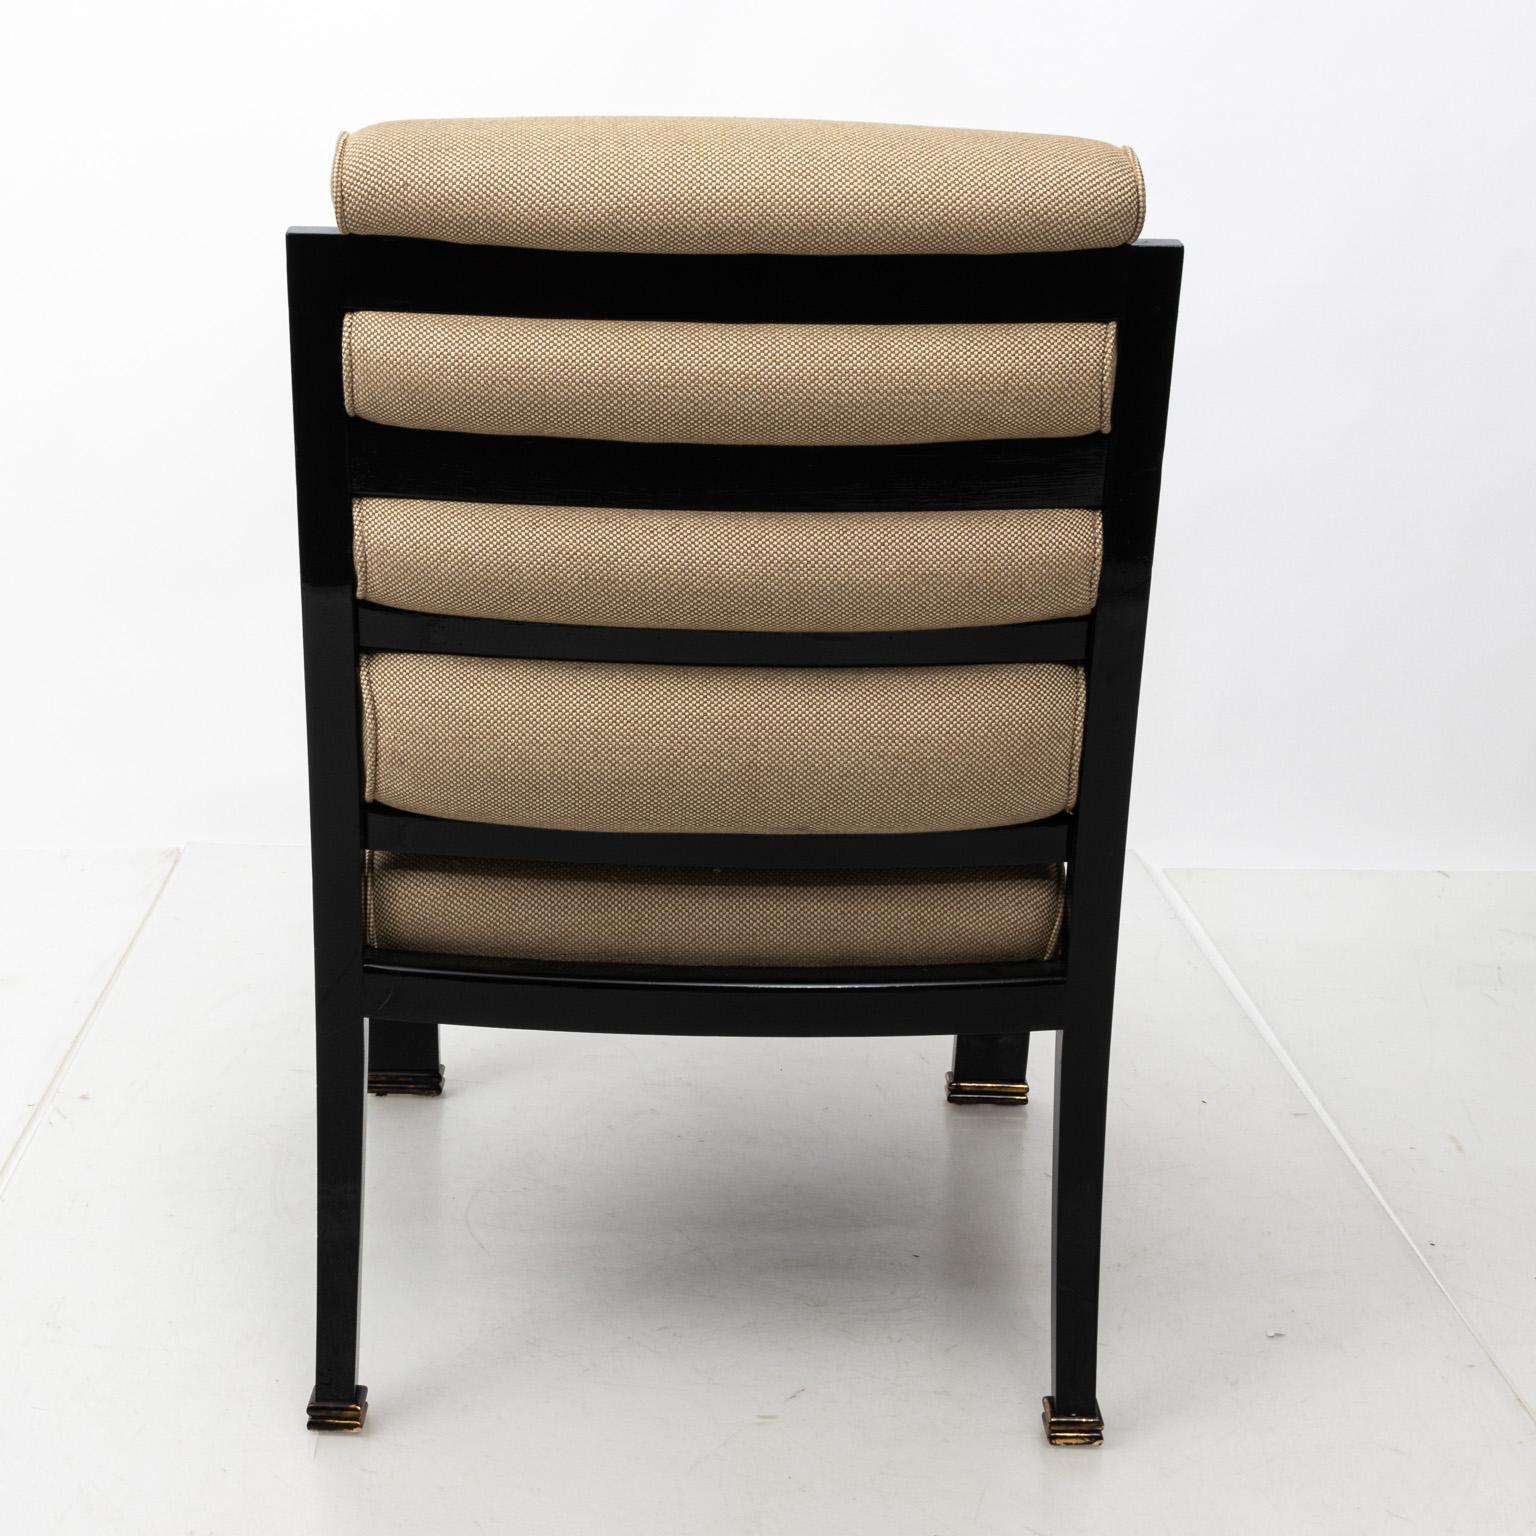 20th Century Black Lacquered Upholstered Desk Chair